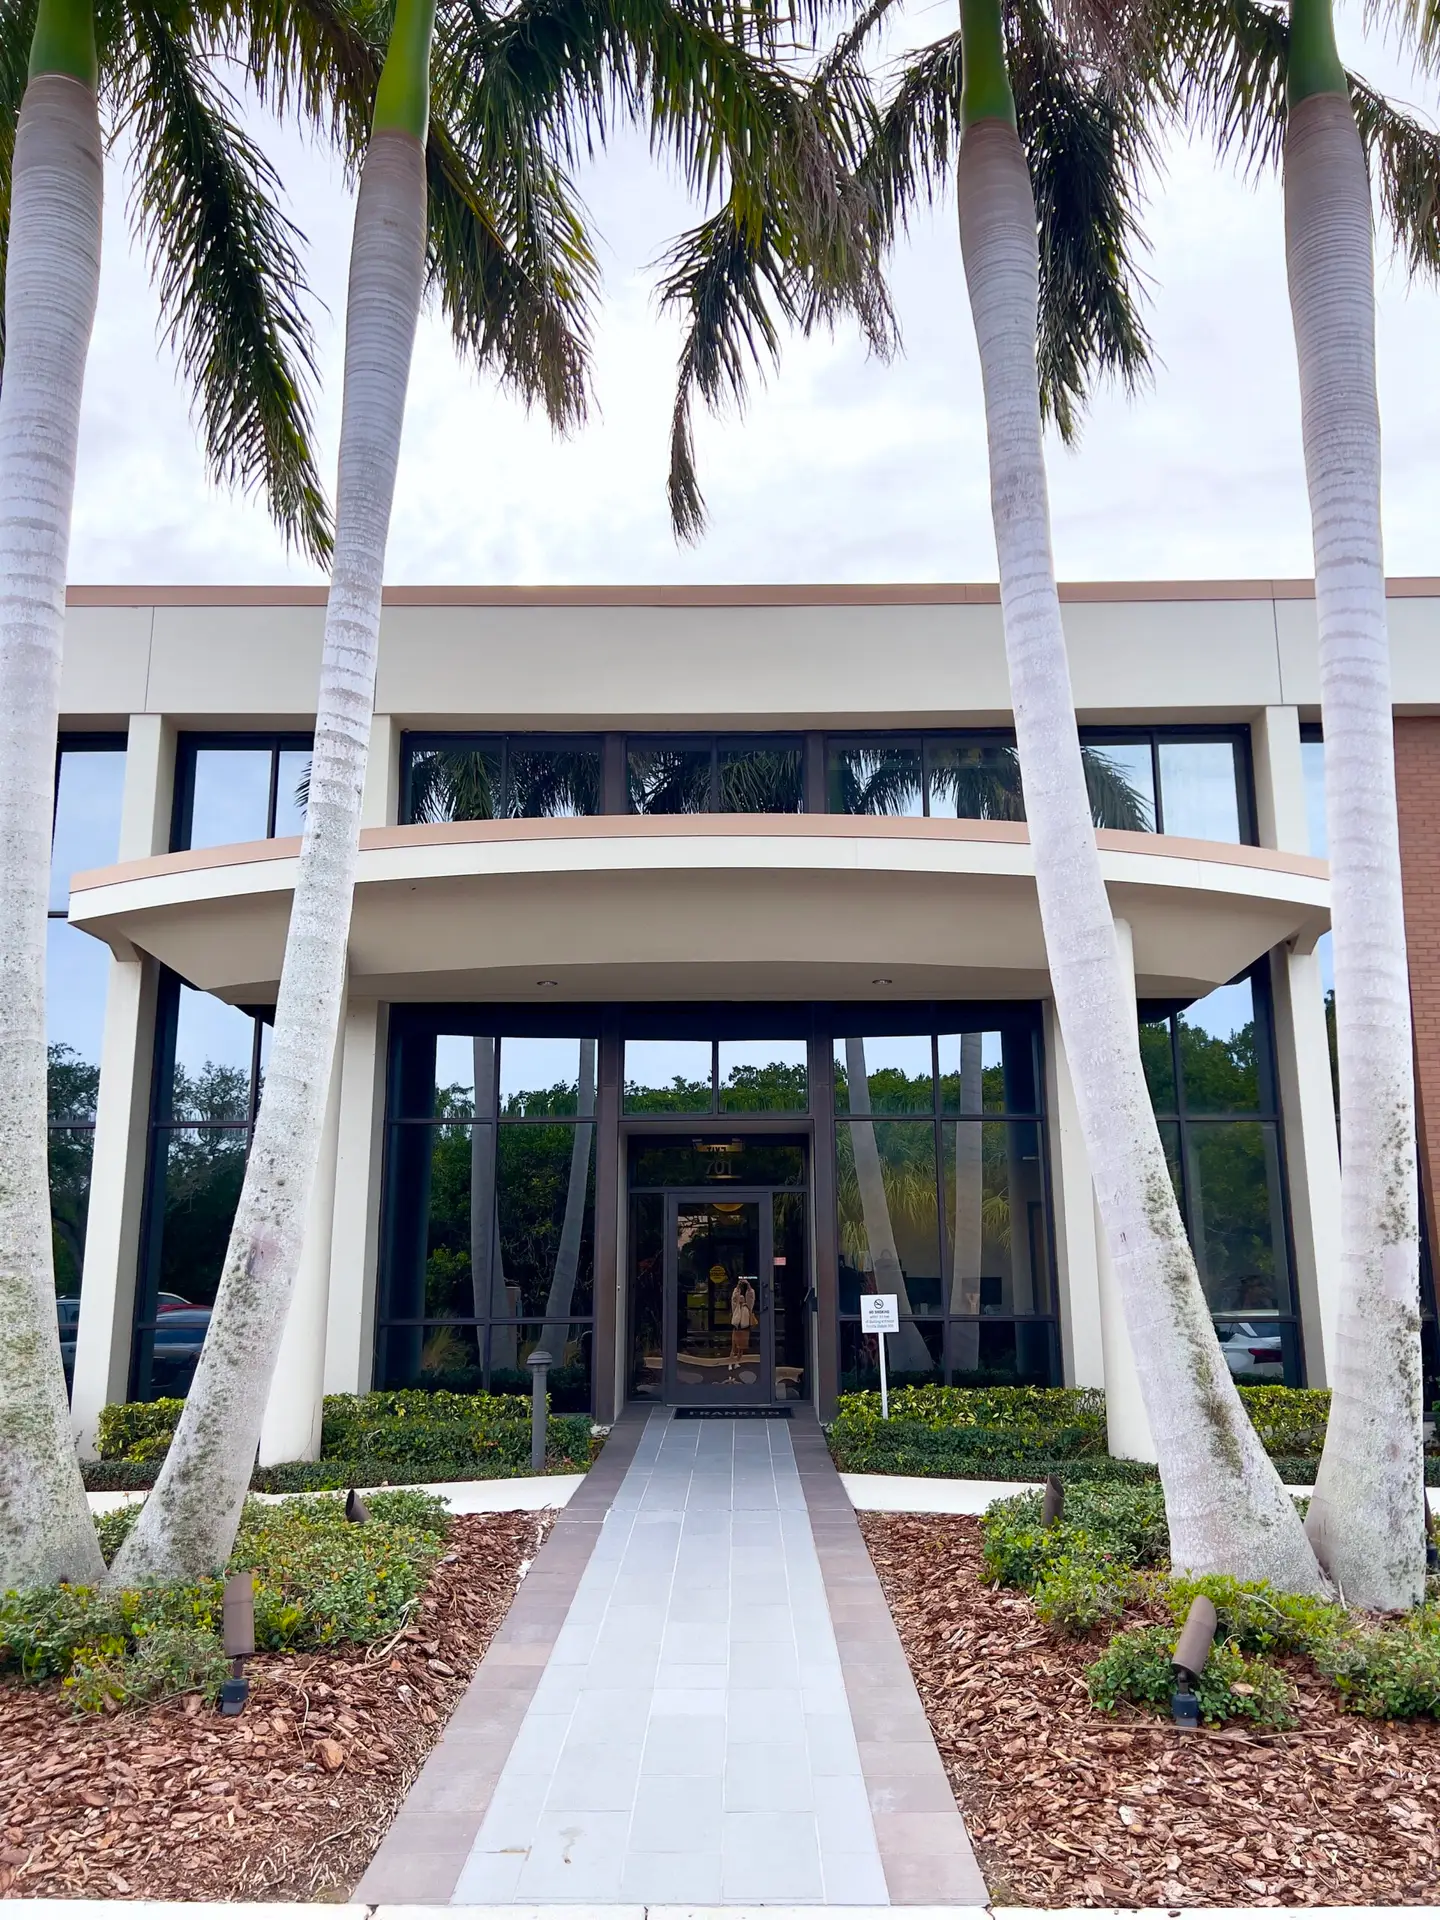 Exterior photo of the administrative office. Two royal palm trees on both sides of the walkway leading up to the glass front doors. Orange trim and tan walls.